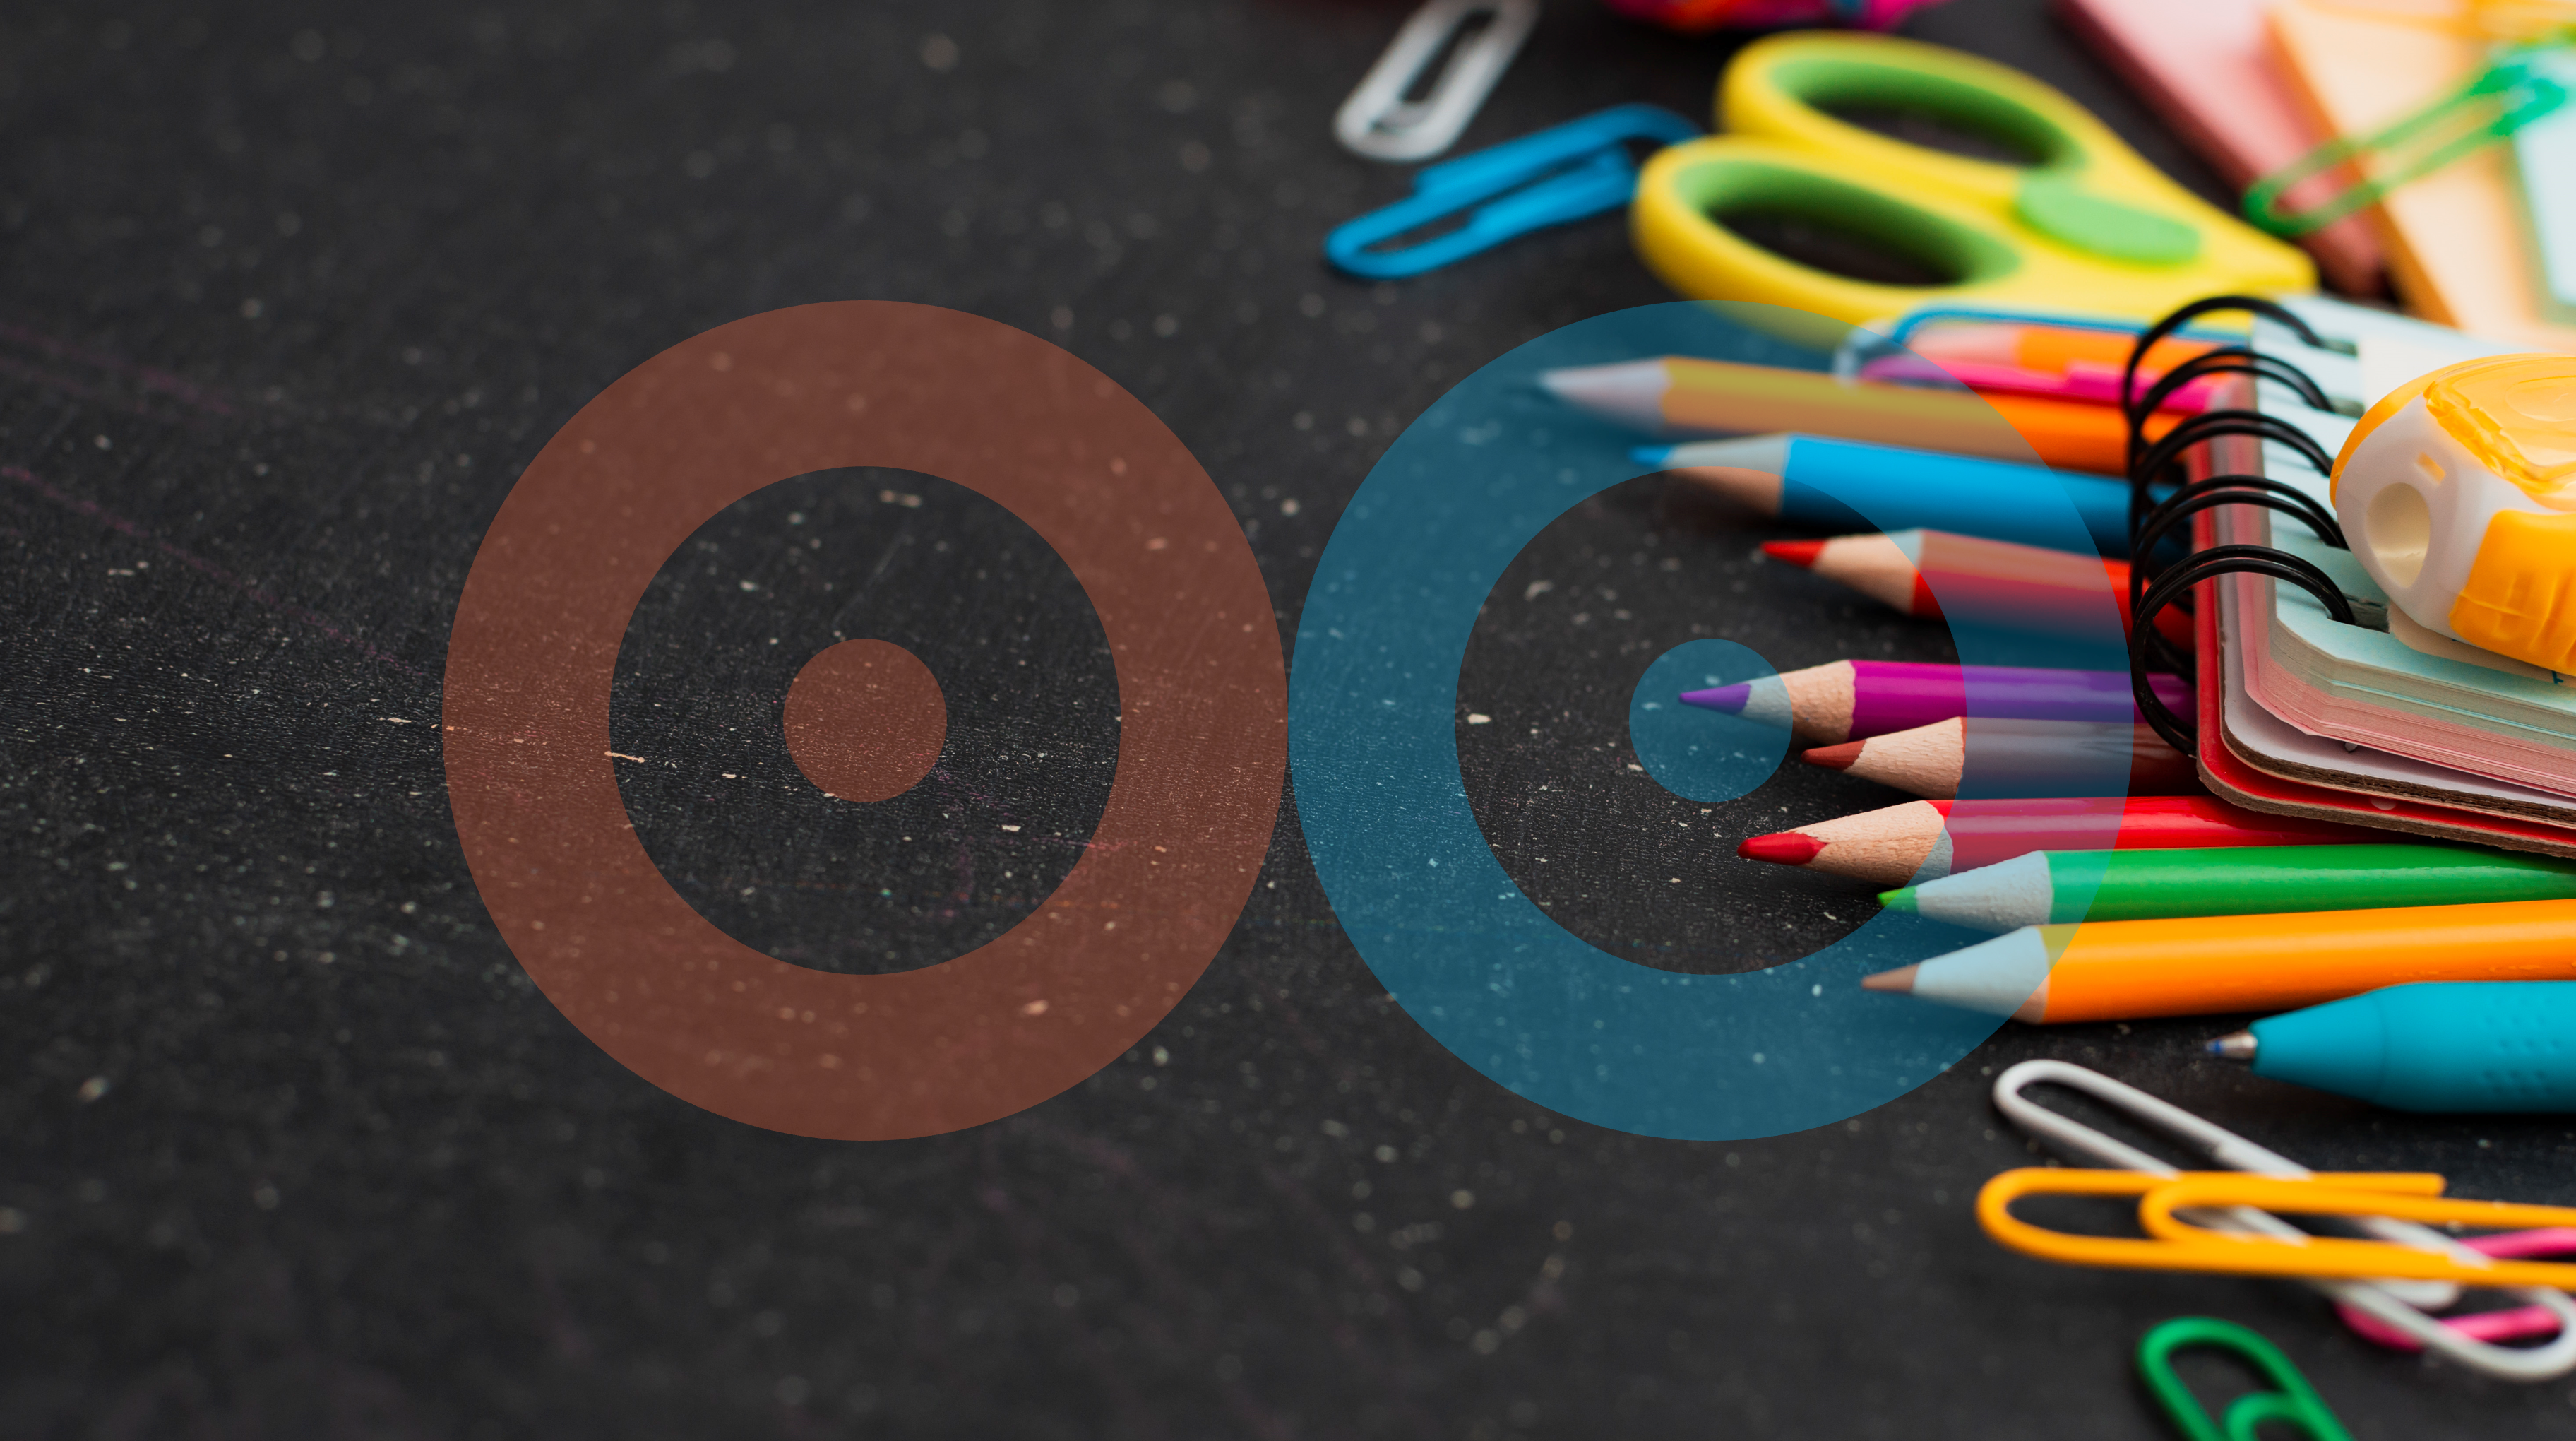 School supplies on a black background with a logo in the center